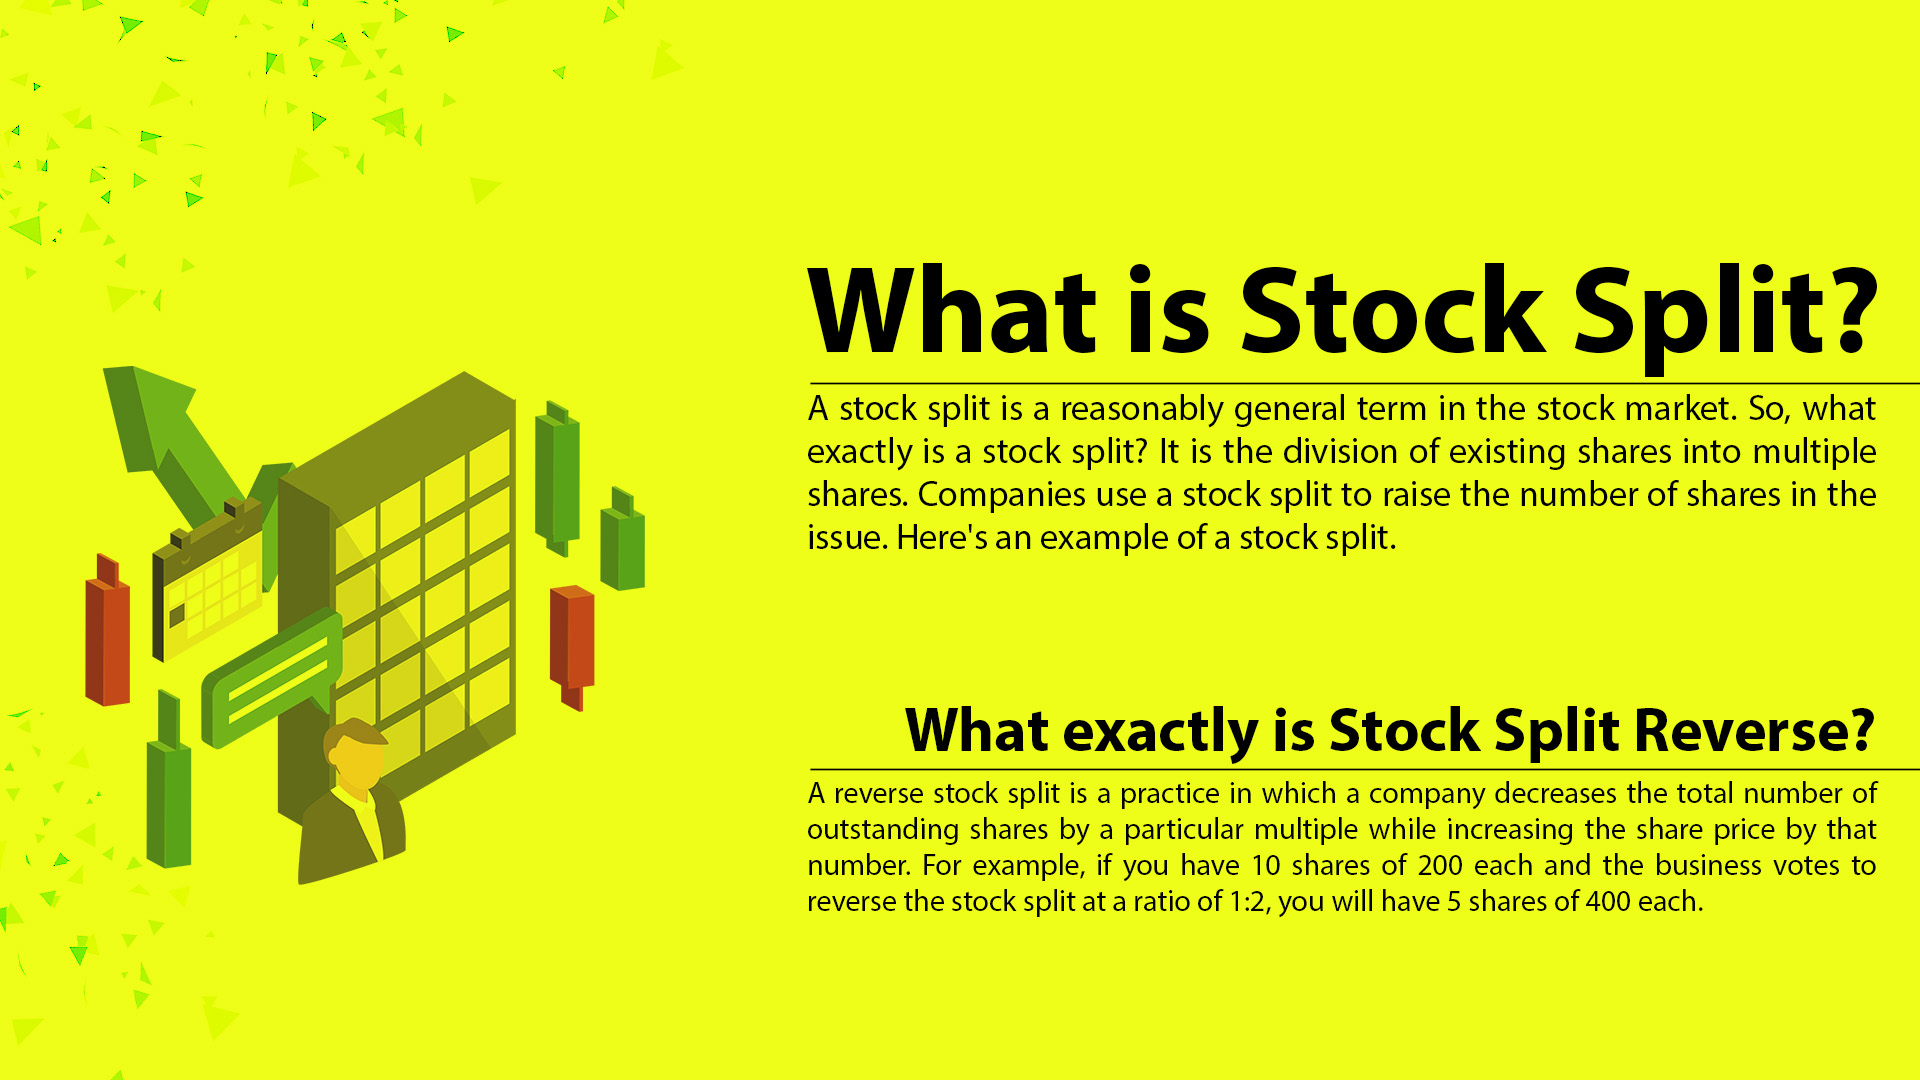 What Are Stock Splits?